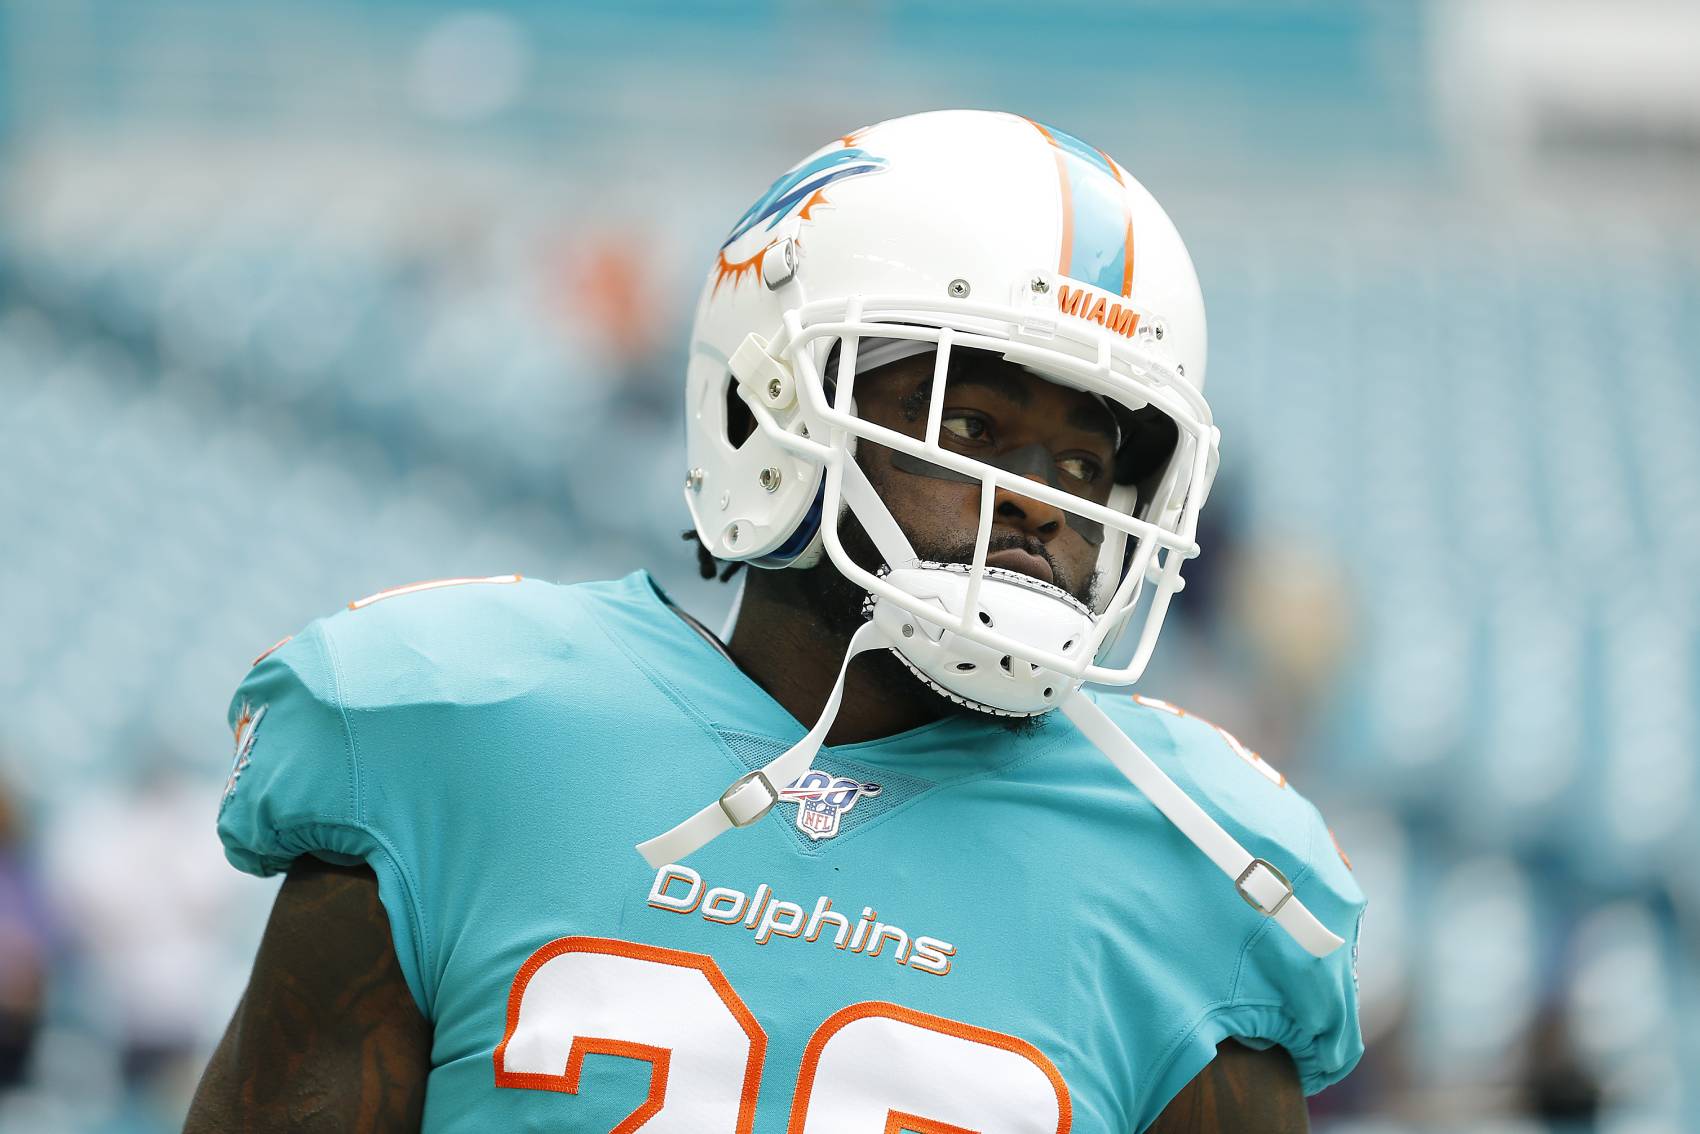 If former Miami Dolphins defensive back Reshad Jones doesn't play again, he intends to pursue a real estate career. 